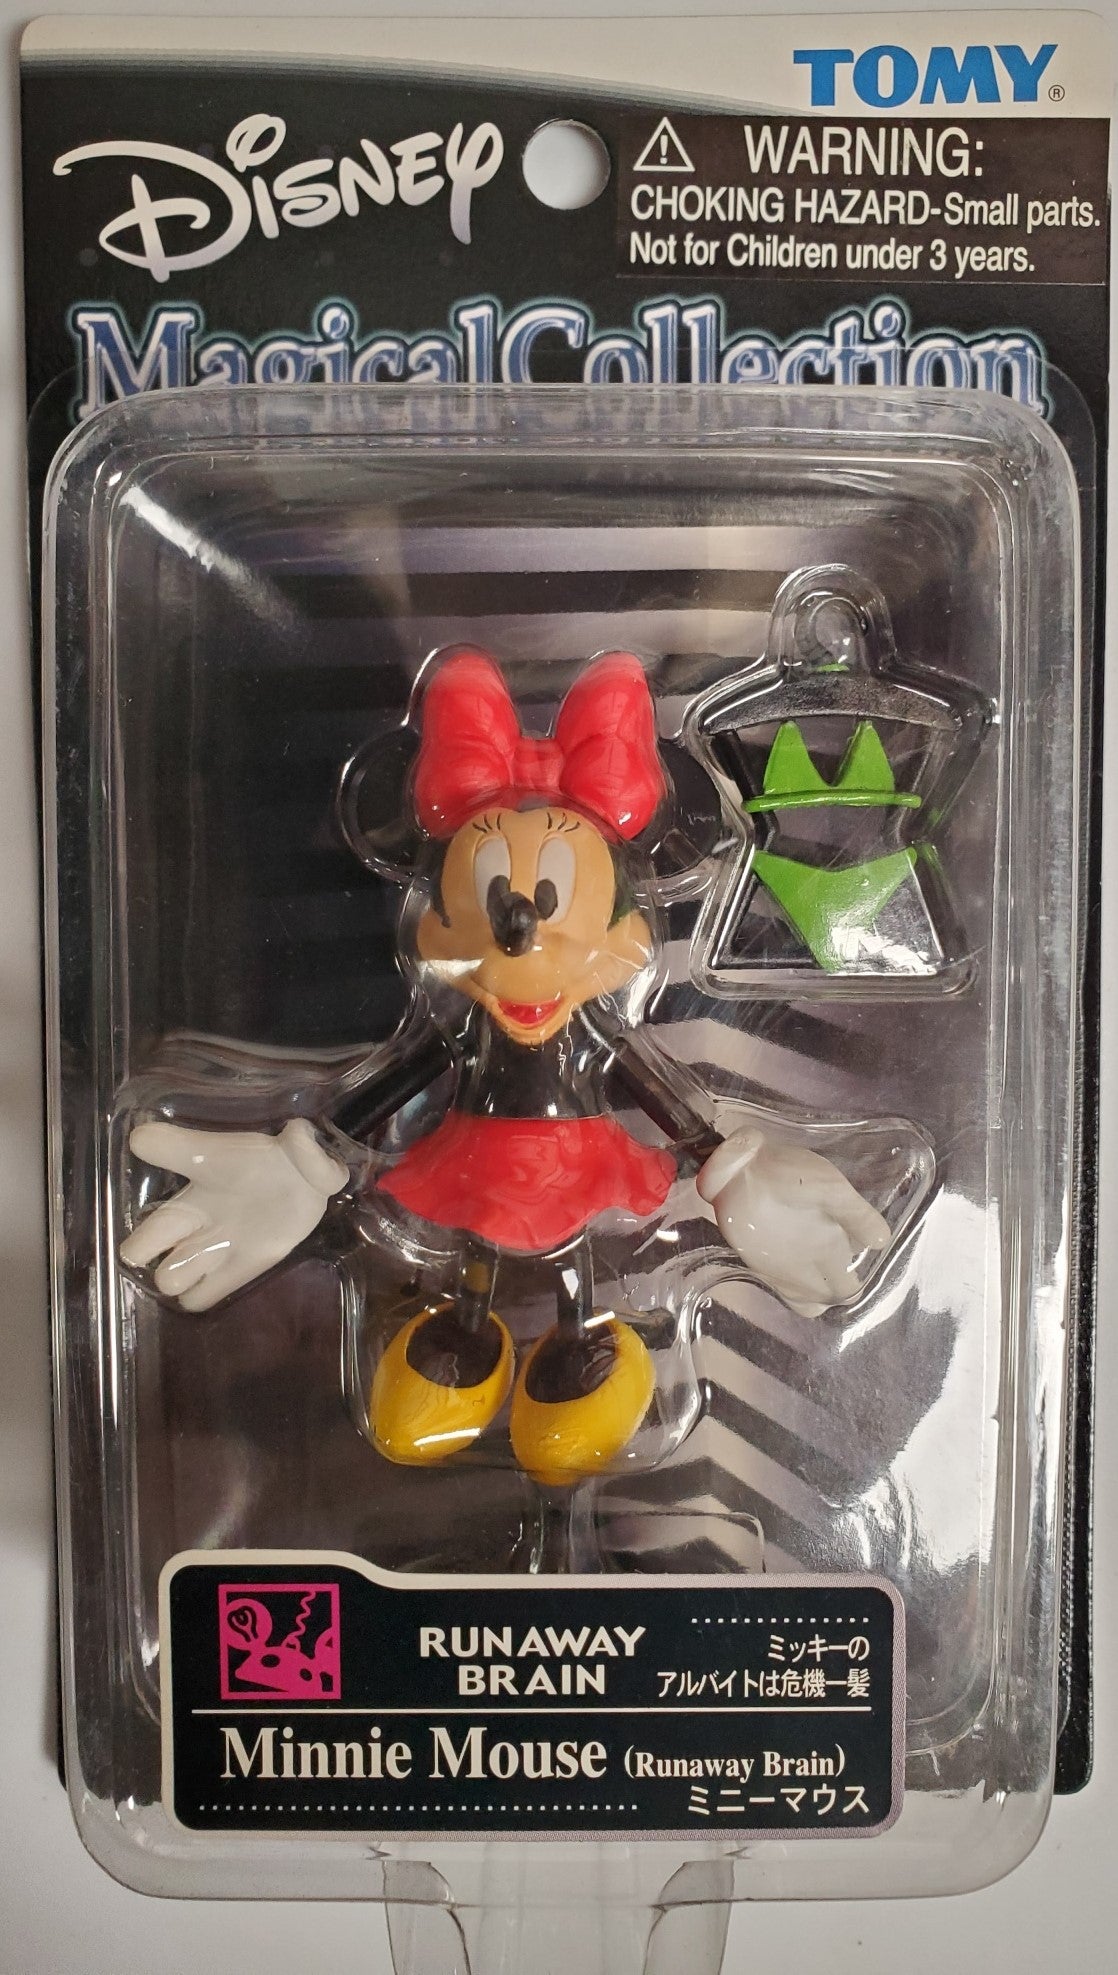 Disney Magical Collection MINNIE MOUSE action figure